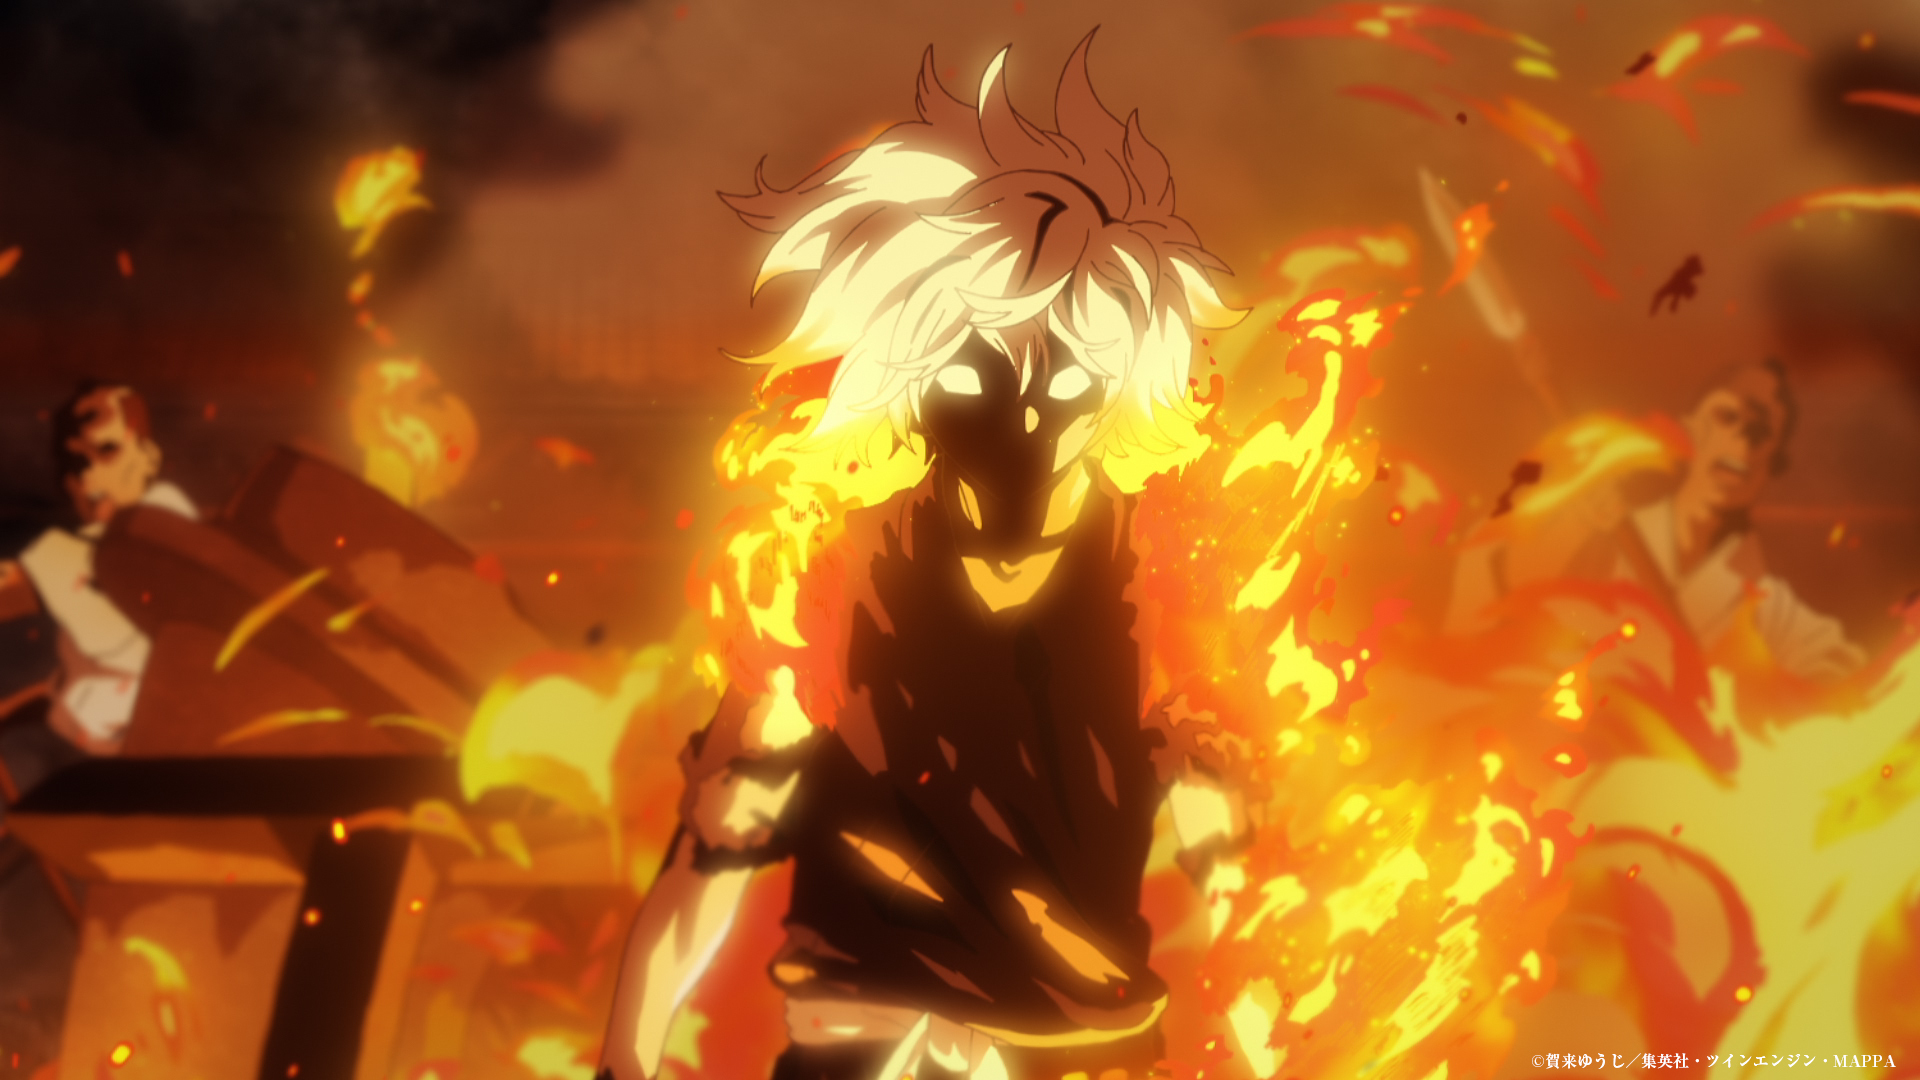 Hell's Paradise Episode 1 Reveals Preview Images - Anime Corner